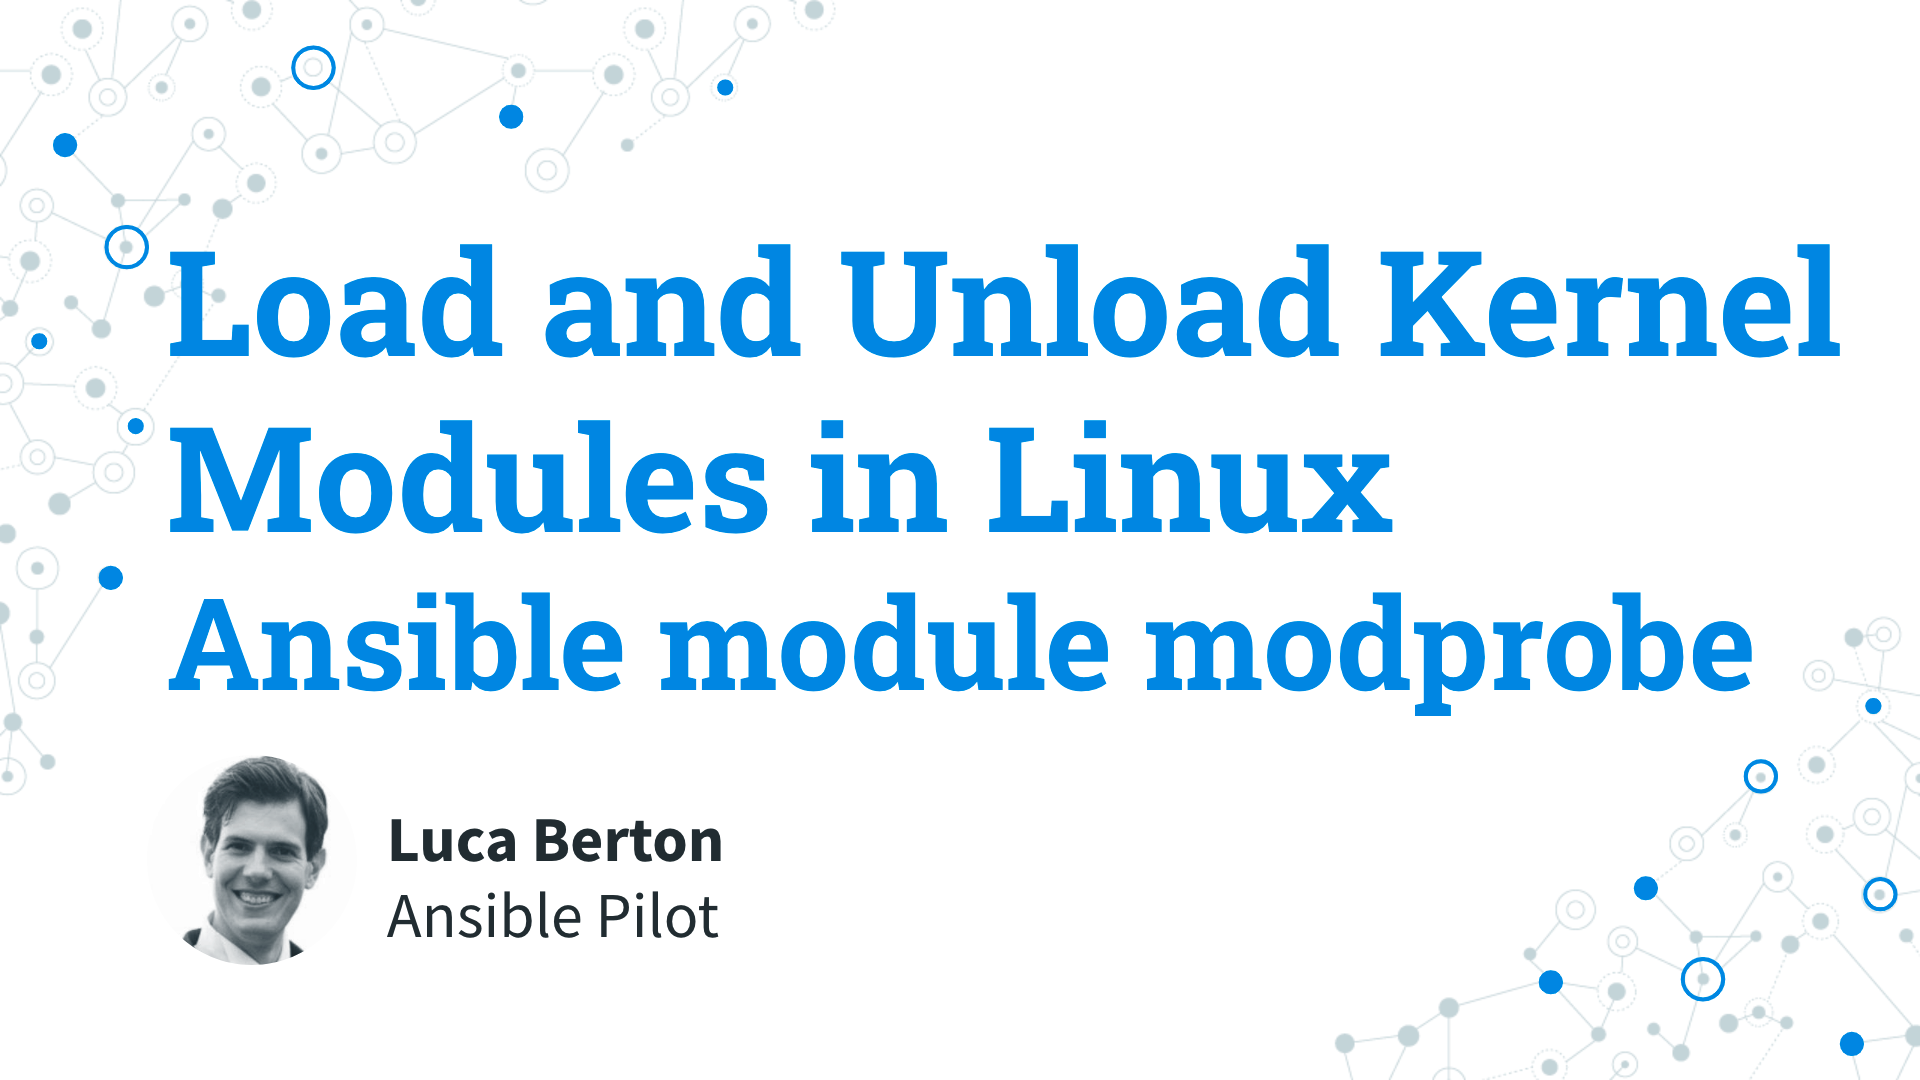 Load and Unload Kernel Modules in Linux - Ansible module modprobe